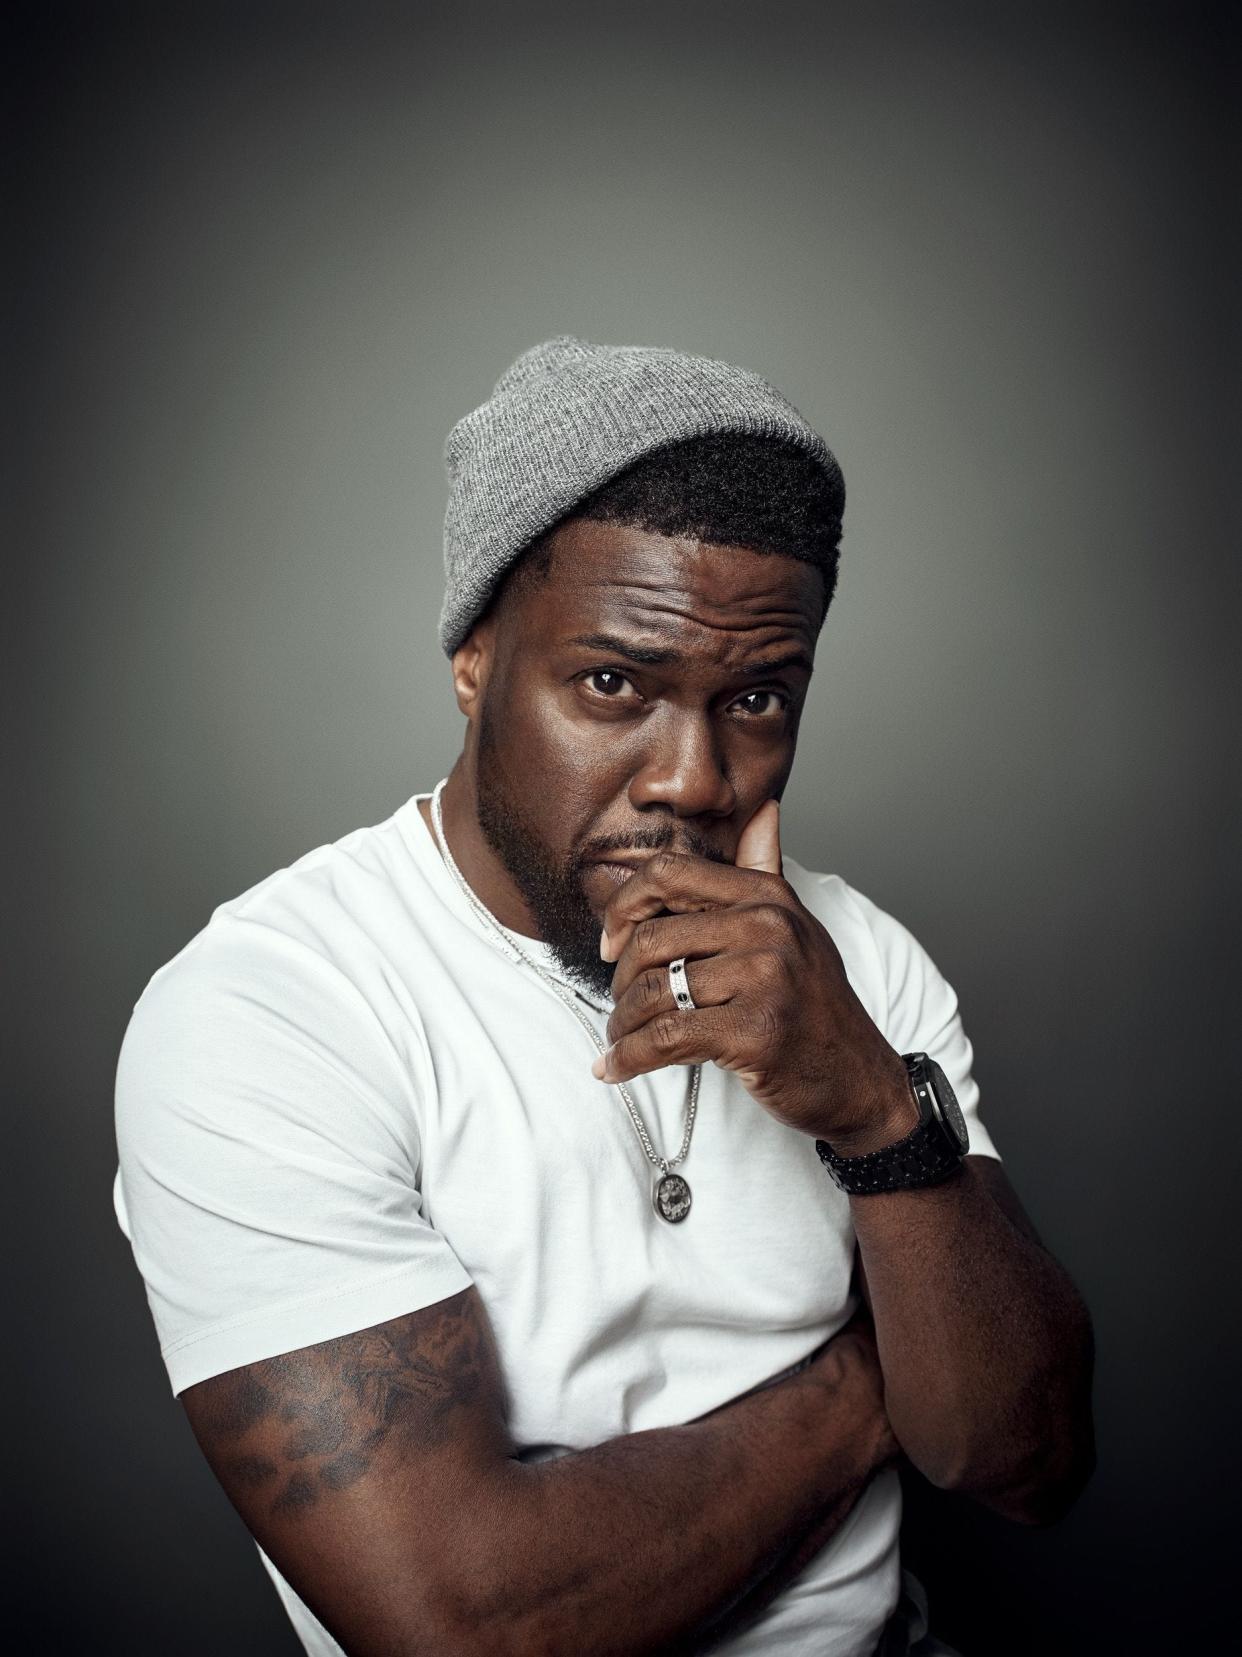 Kevin Hart will perform his award-winning “Reality Check” standup show in the Turning Stone Event Center on Sunday, May 14.